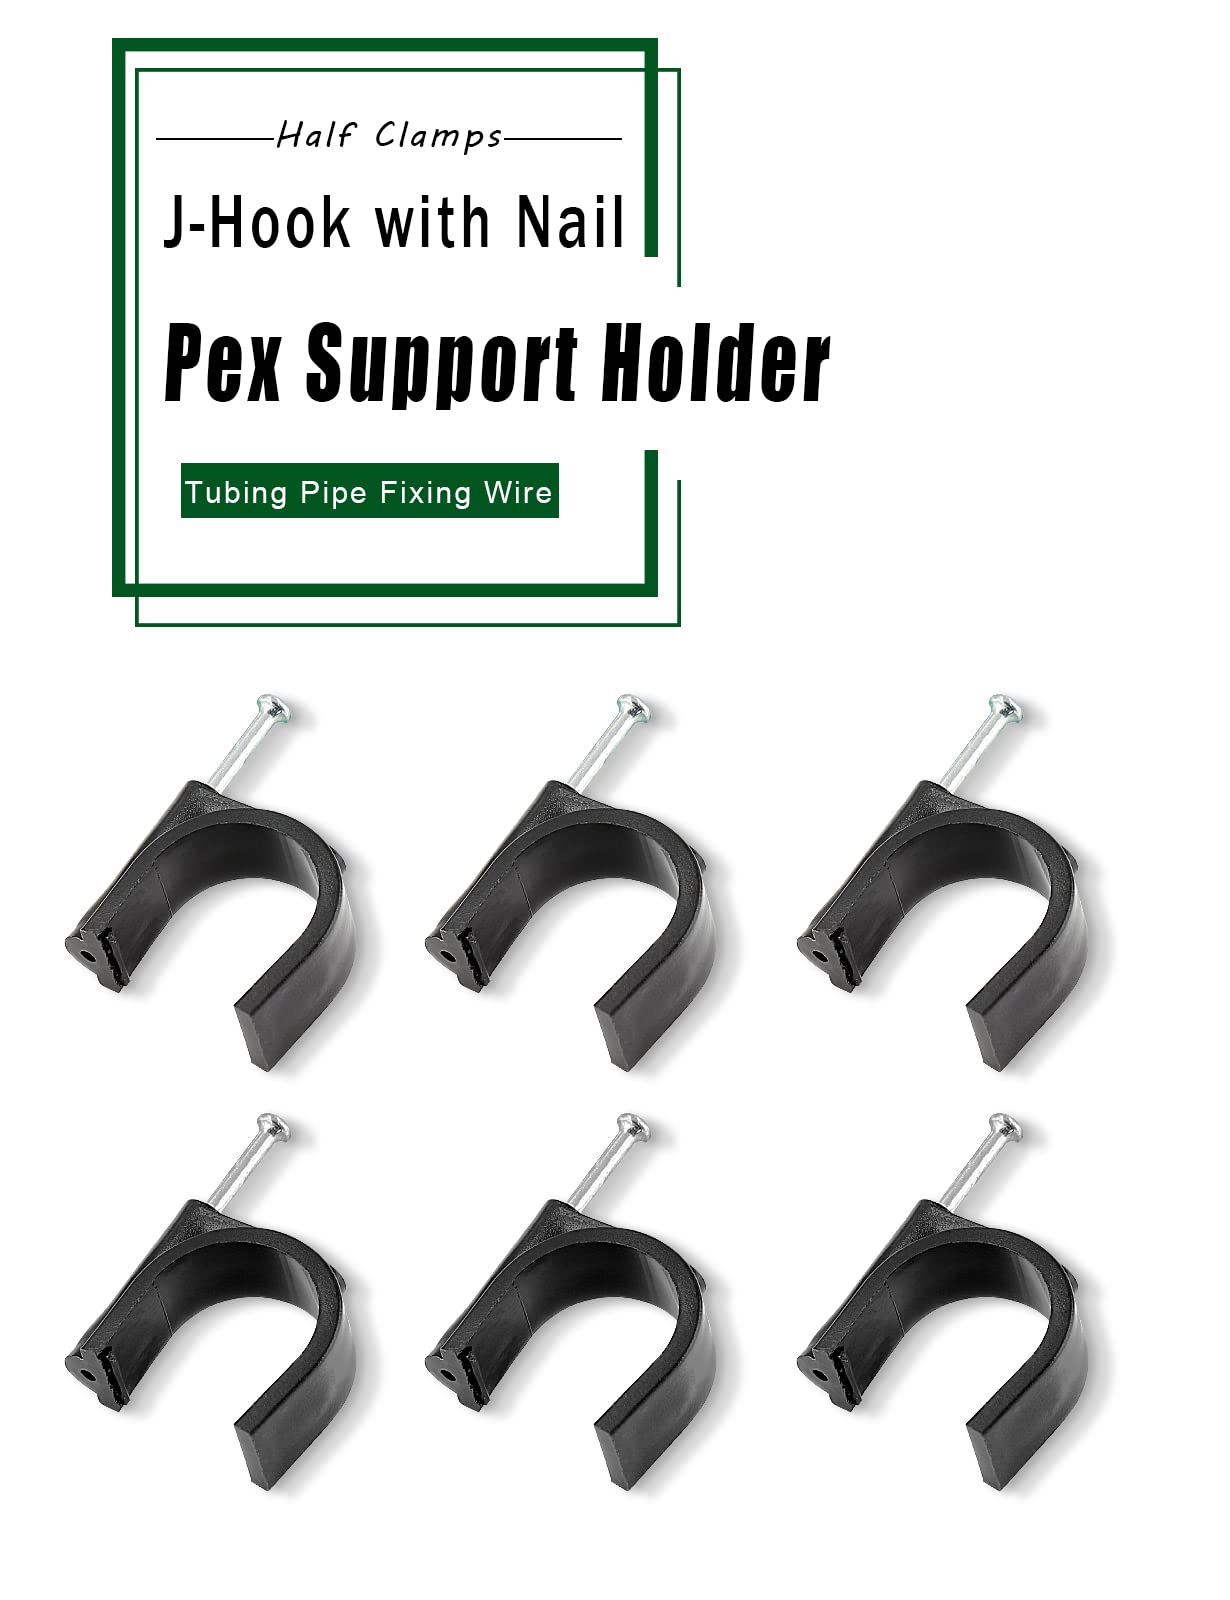 Rierdge 100 Pieces Half Clamps J-Hook with Nail, 1/2 & 3/4 Inch Black Pex Support Holder for Tubing Pipe Fixing Wire 12mm & 20 mm